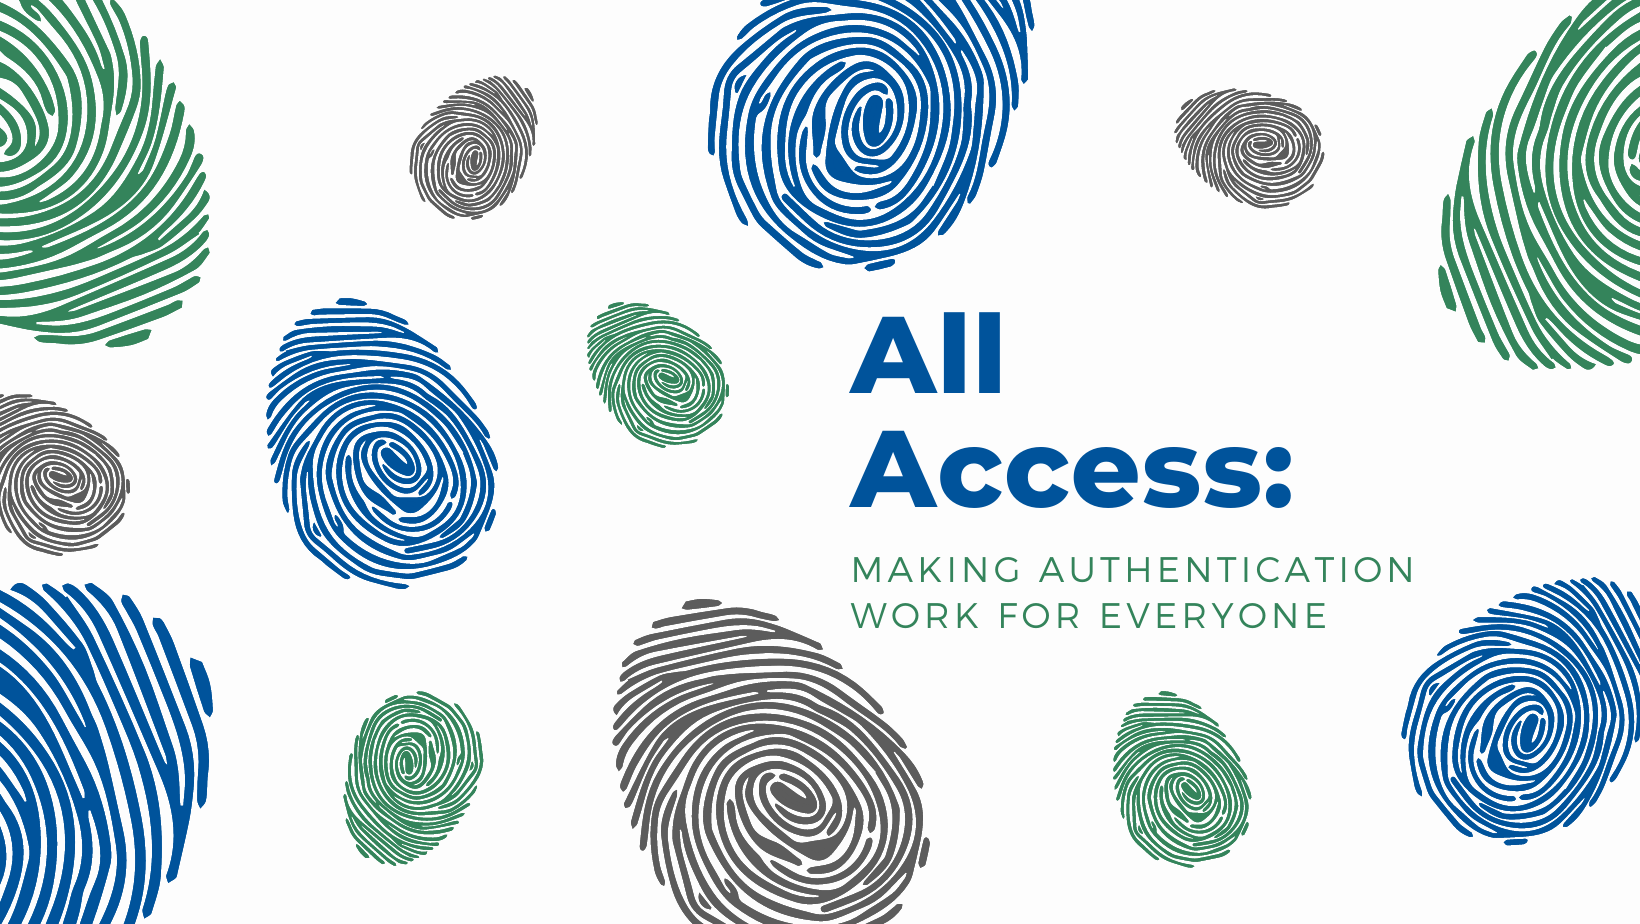 Graphic reading "All Access: Making Authentication Work for Everyone" with multiple thumbprints.